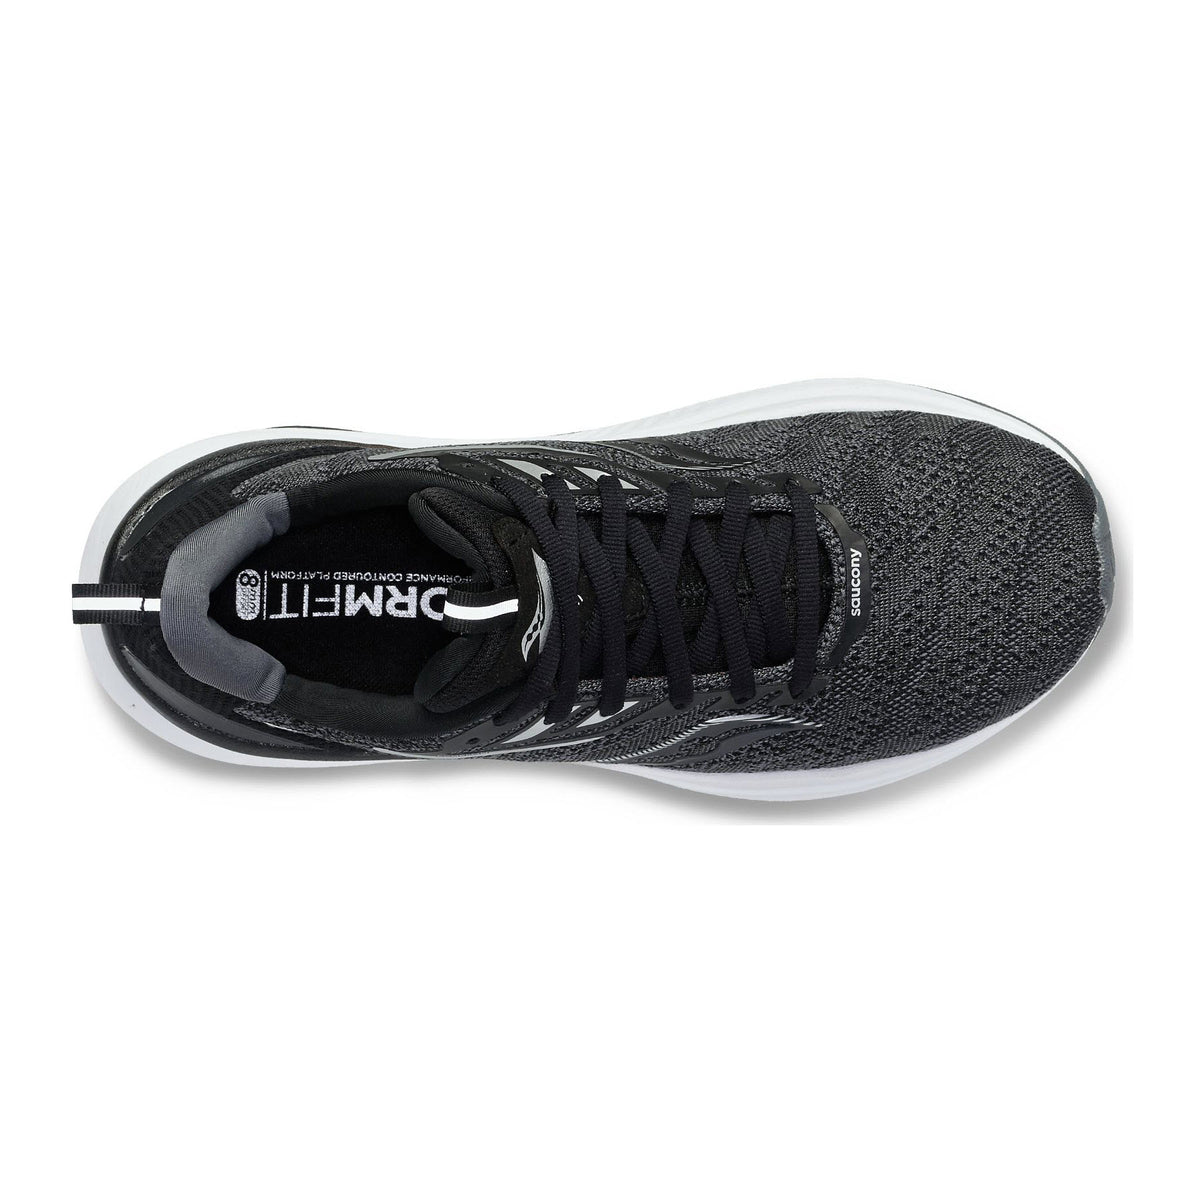 Top view of a single Saucony Echelon 9 black and white running shoe with laces, featuring a breathable mesh upper and max cushioning, with a label displaying the brand name &quot;Saucony&quot;.